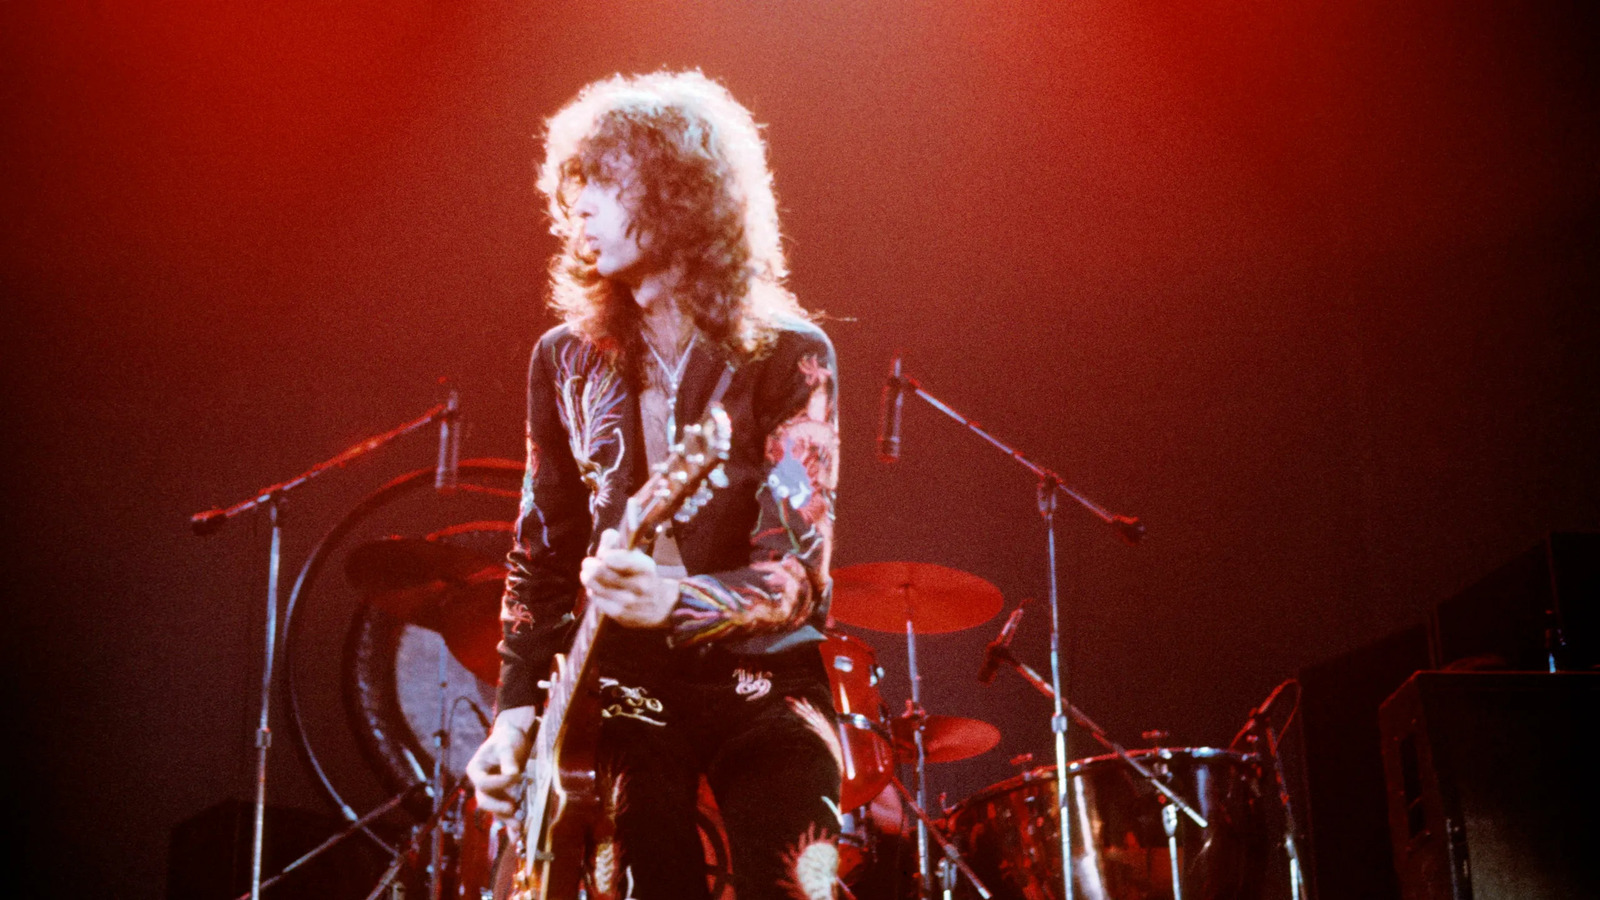 How Much is Jimmy Page from Led Zeppelin Net Worth?